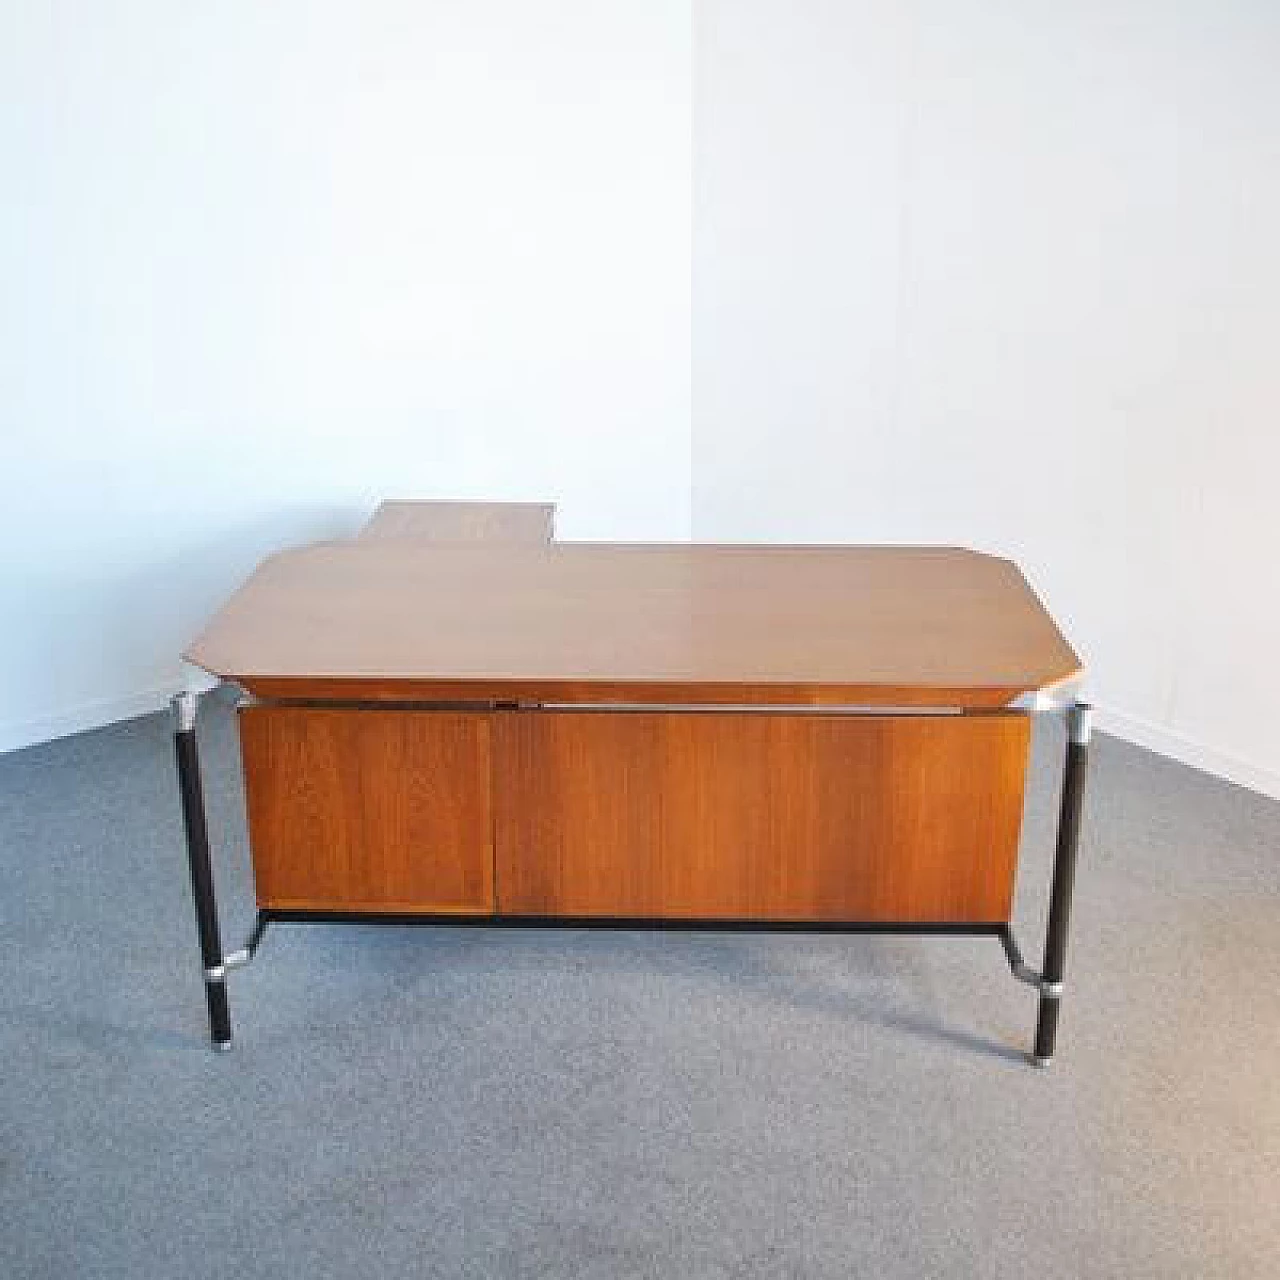 Executive desk by Ico Parisi for MIM Rome, 1950s 1412239